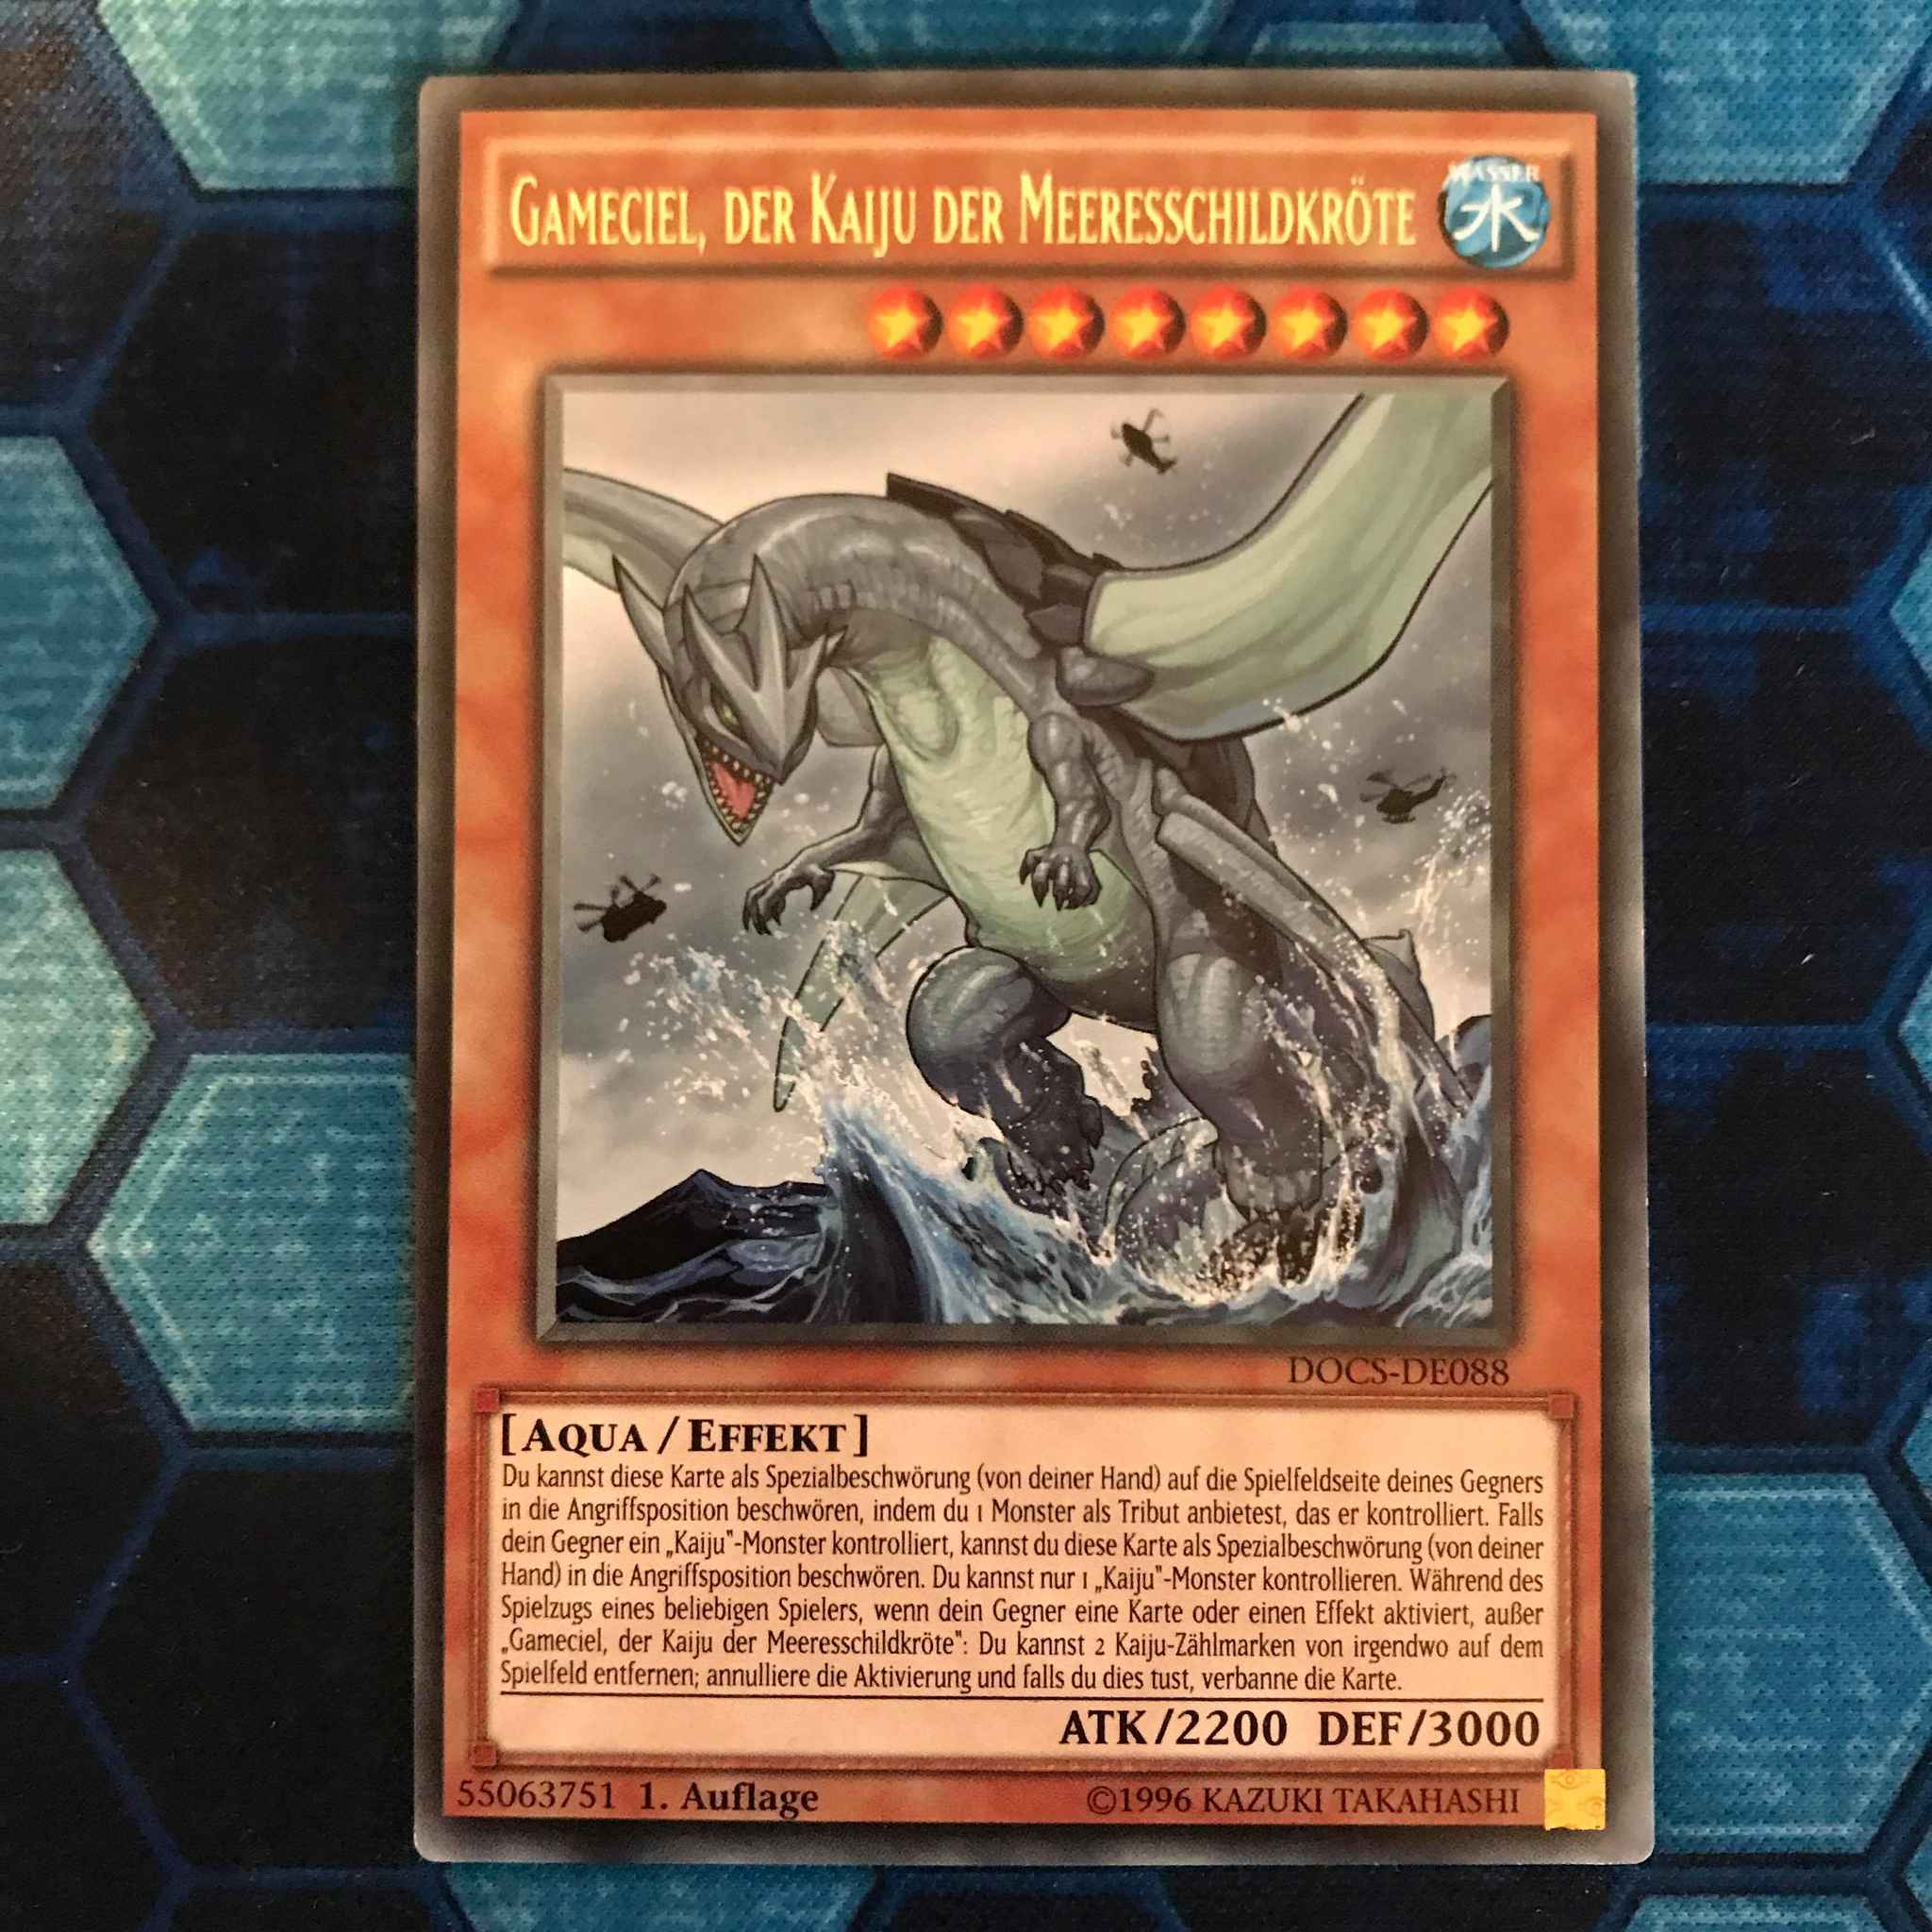 German Gameciel The Sea Turtle Kaiju Gameciel The Sea Turtle Kaiju Dimension Of Chaos Yugioh Online Gaming Store For Cards Miniatures Singles Packs Booster Boxes